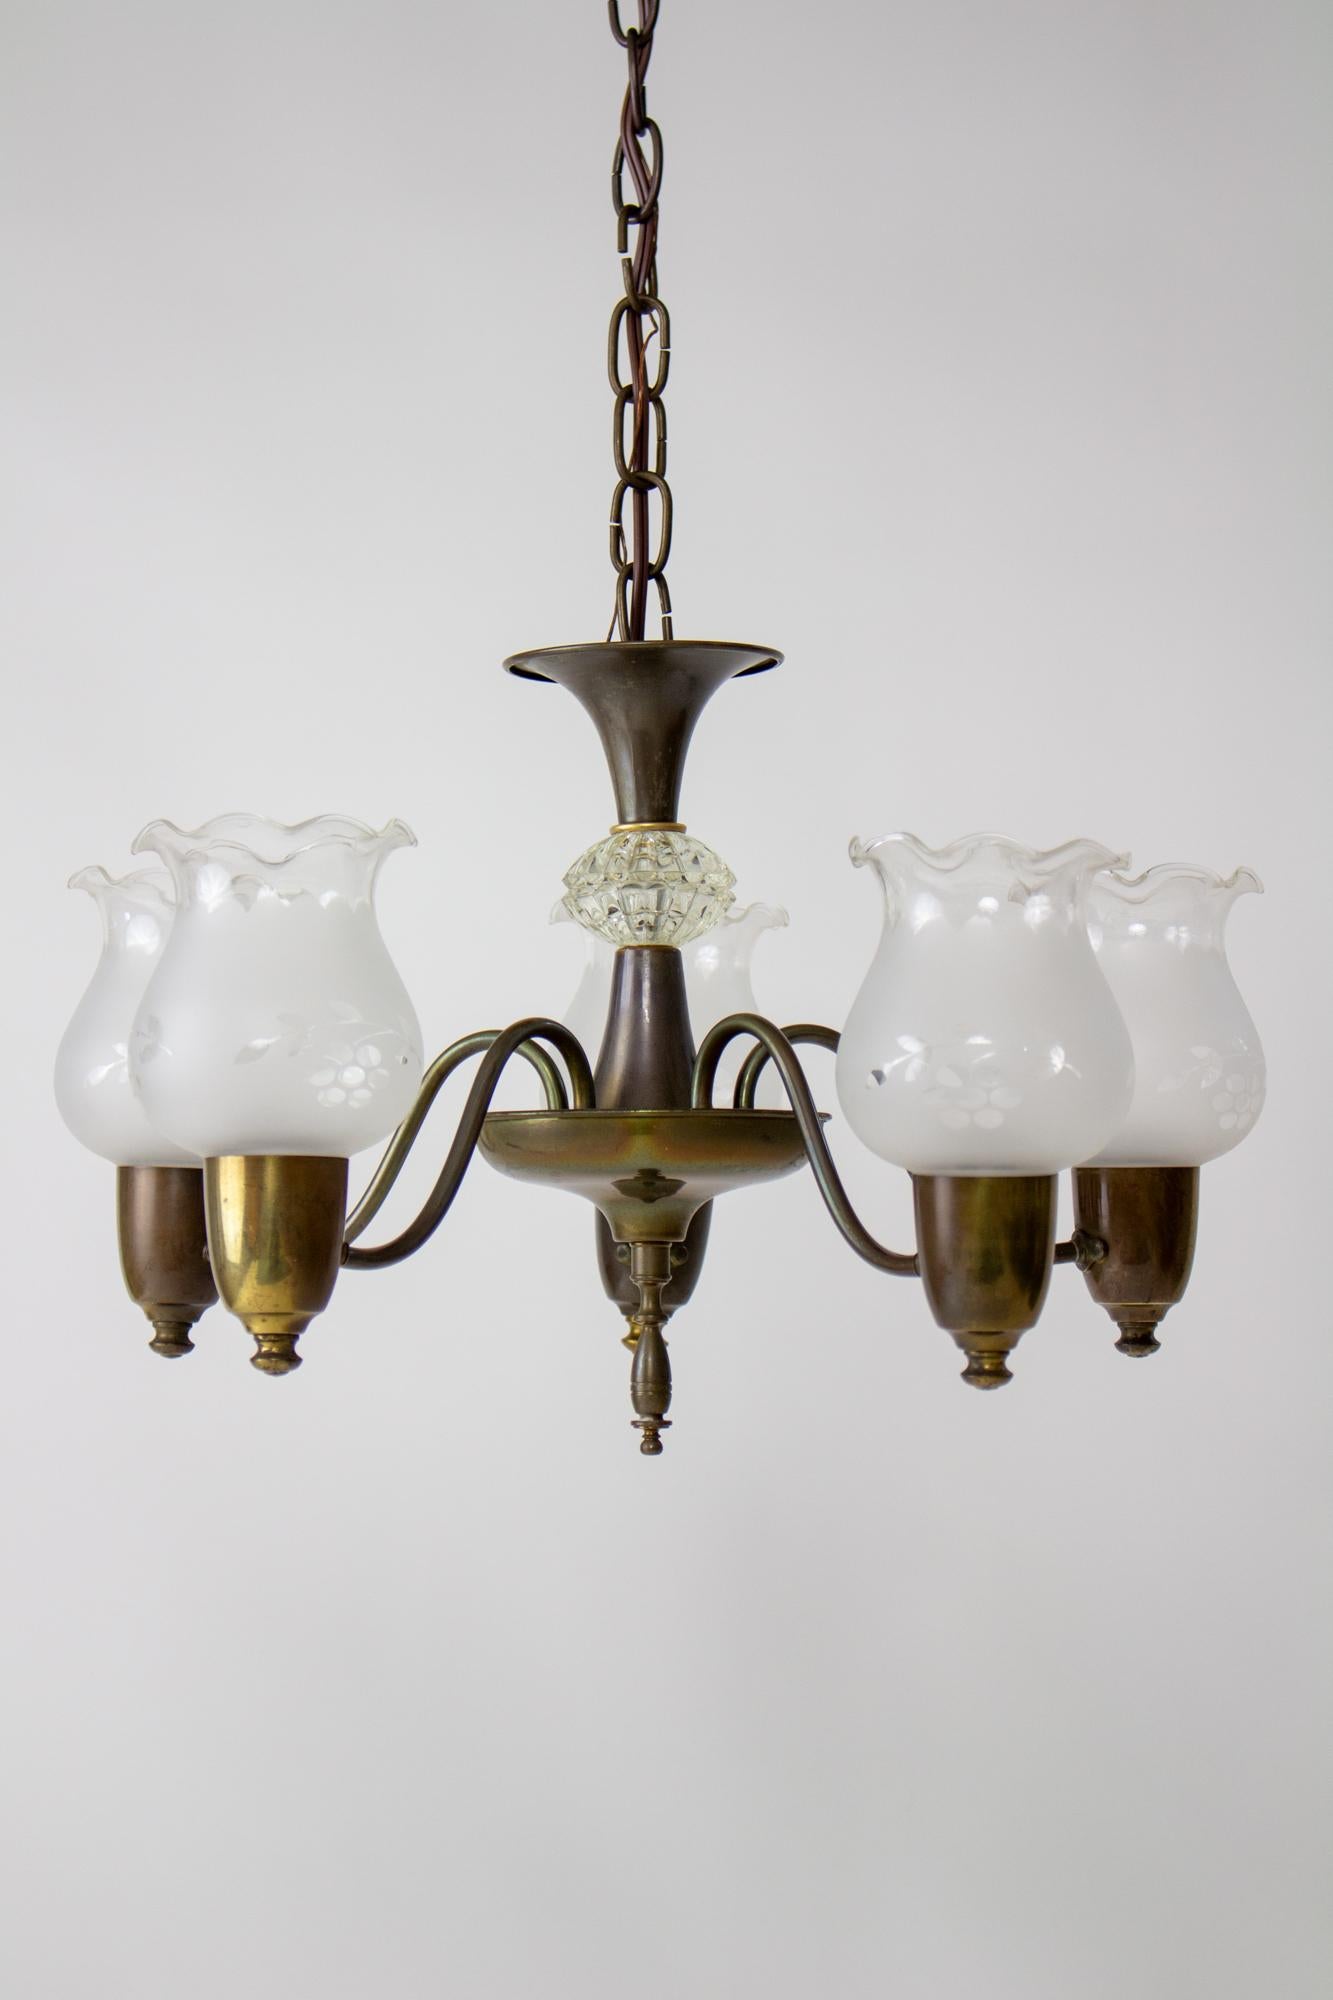 1930's Five Light Art Deco Chandelier In Good Condition For Sale In Canton, MA